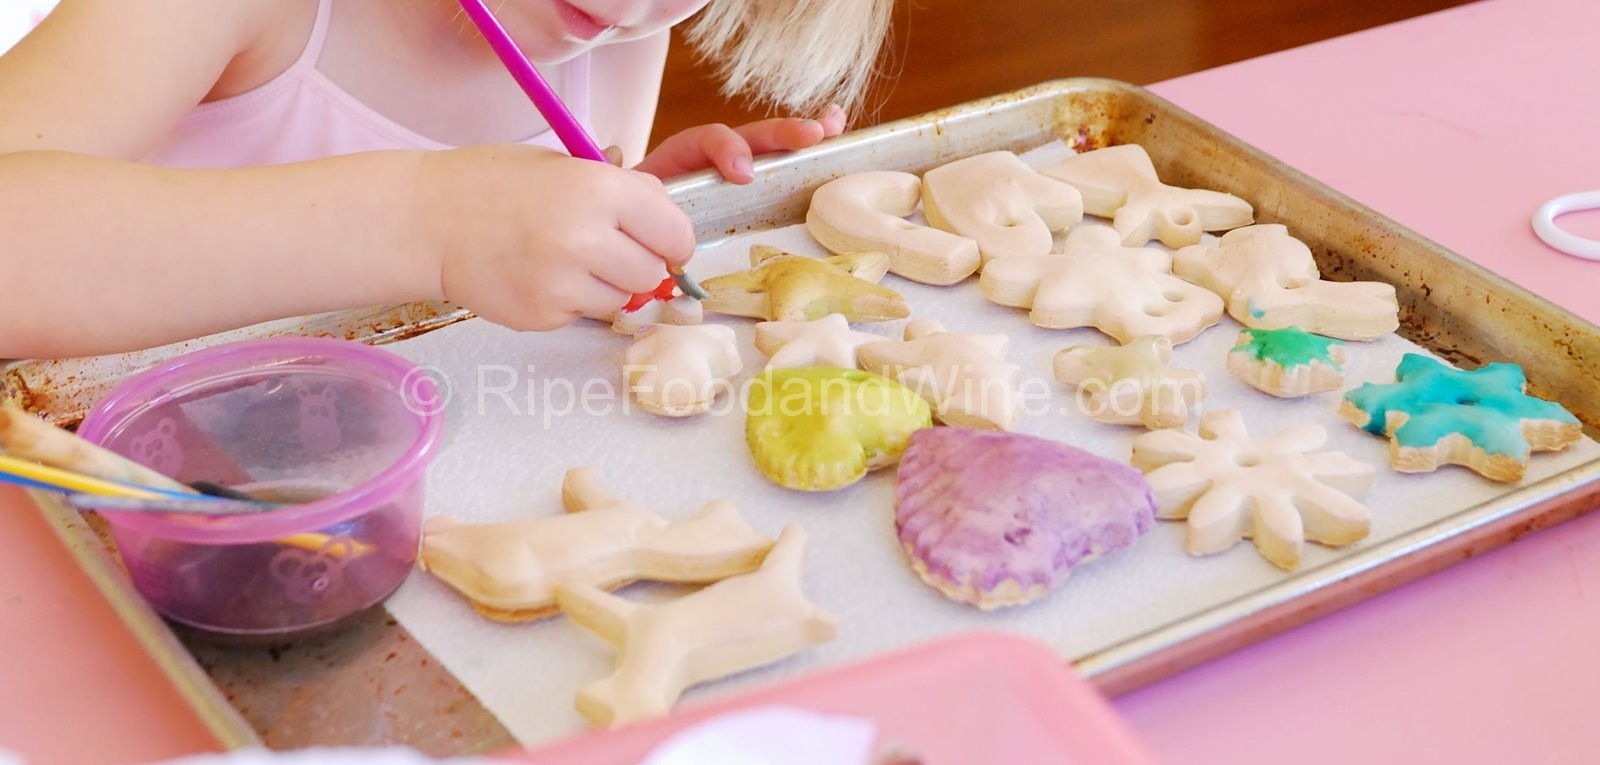 Baker’s Clay – Make it Yourself Play Dough